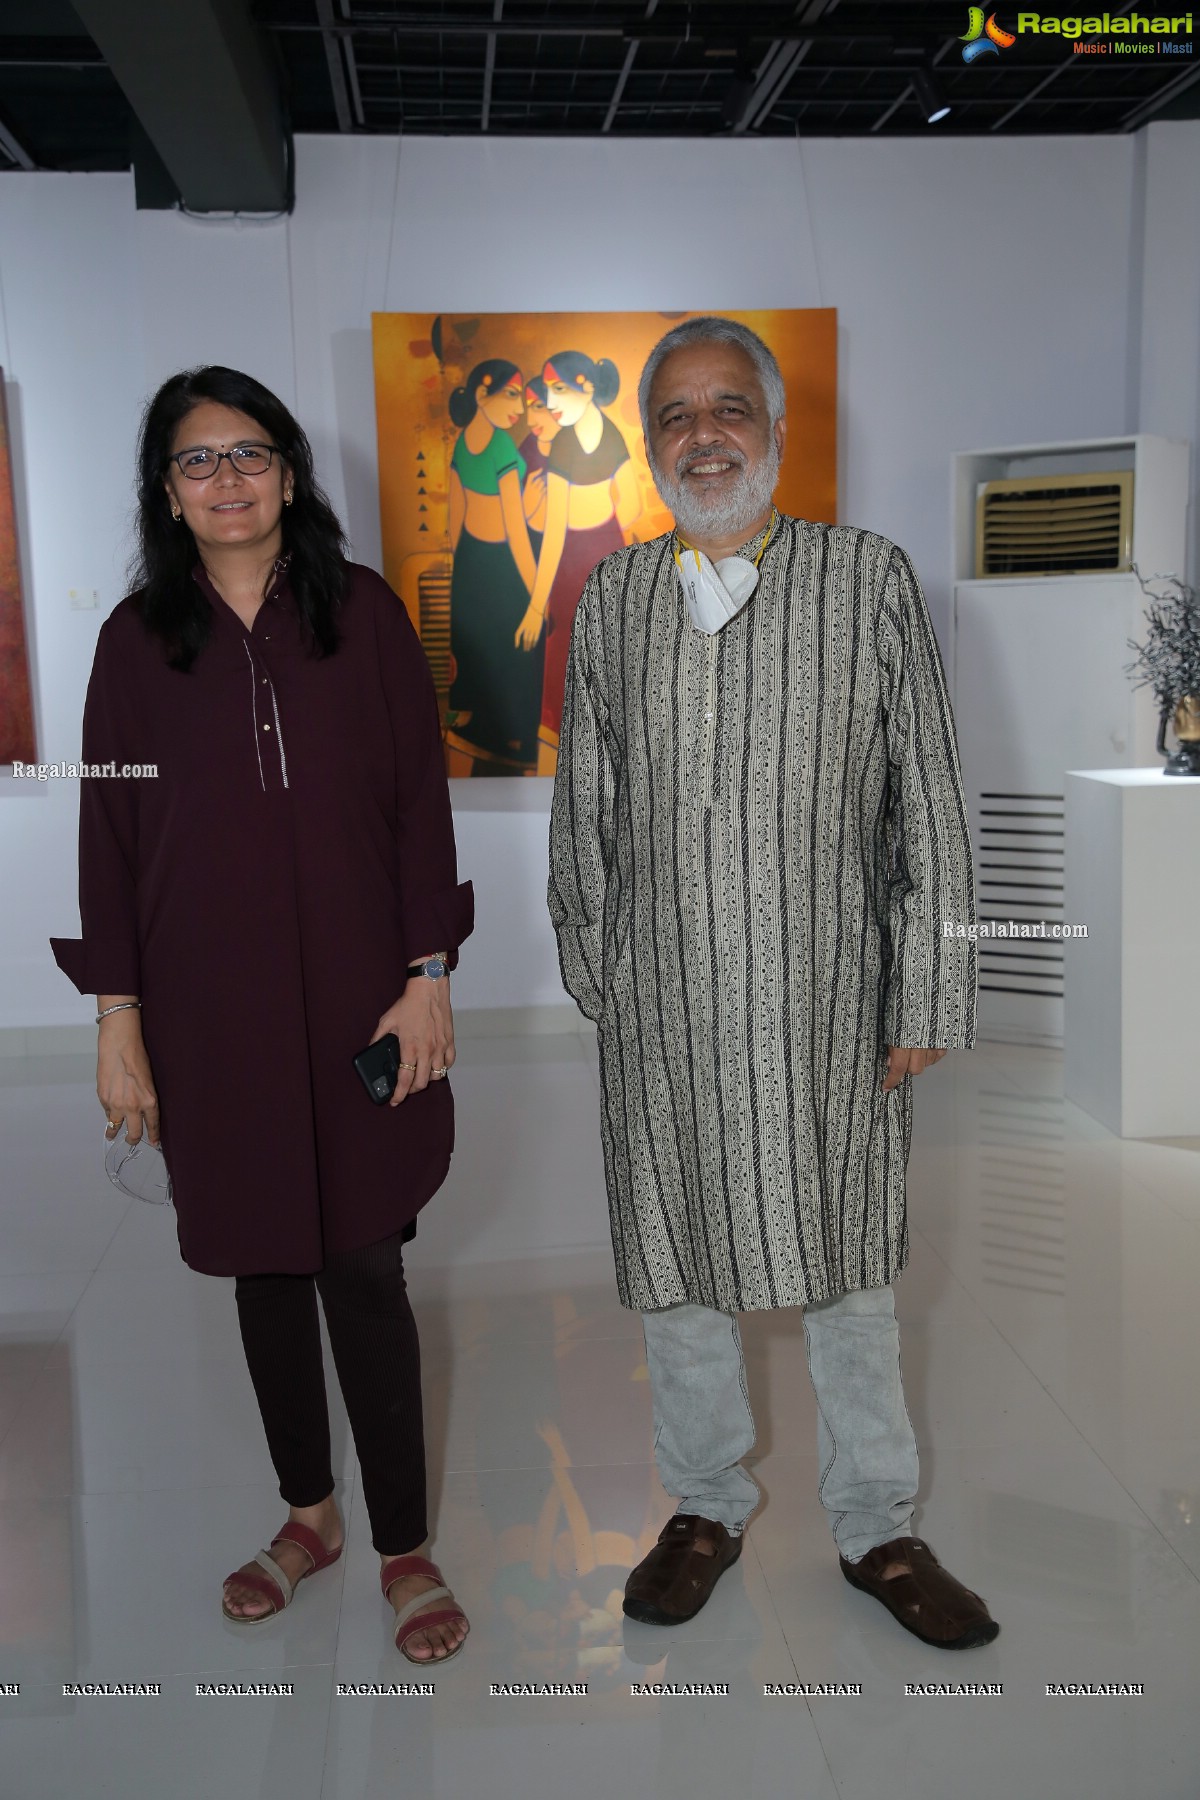 The Other Side: An Exhibition of Paintings by Muzaffar Ali at Kalakriti Art Gallery